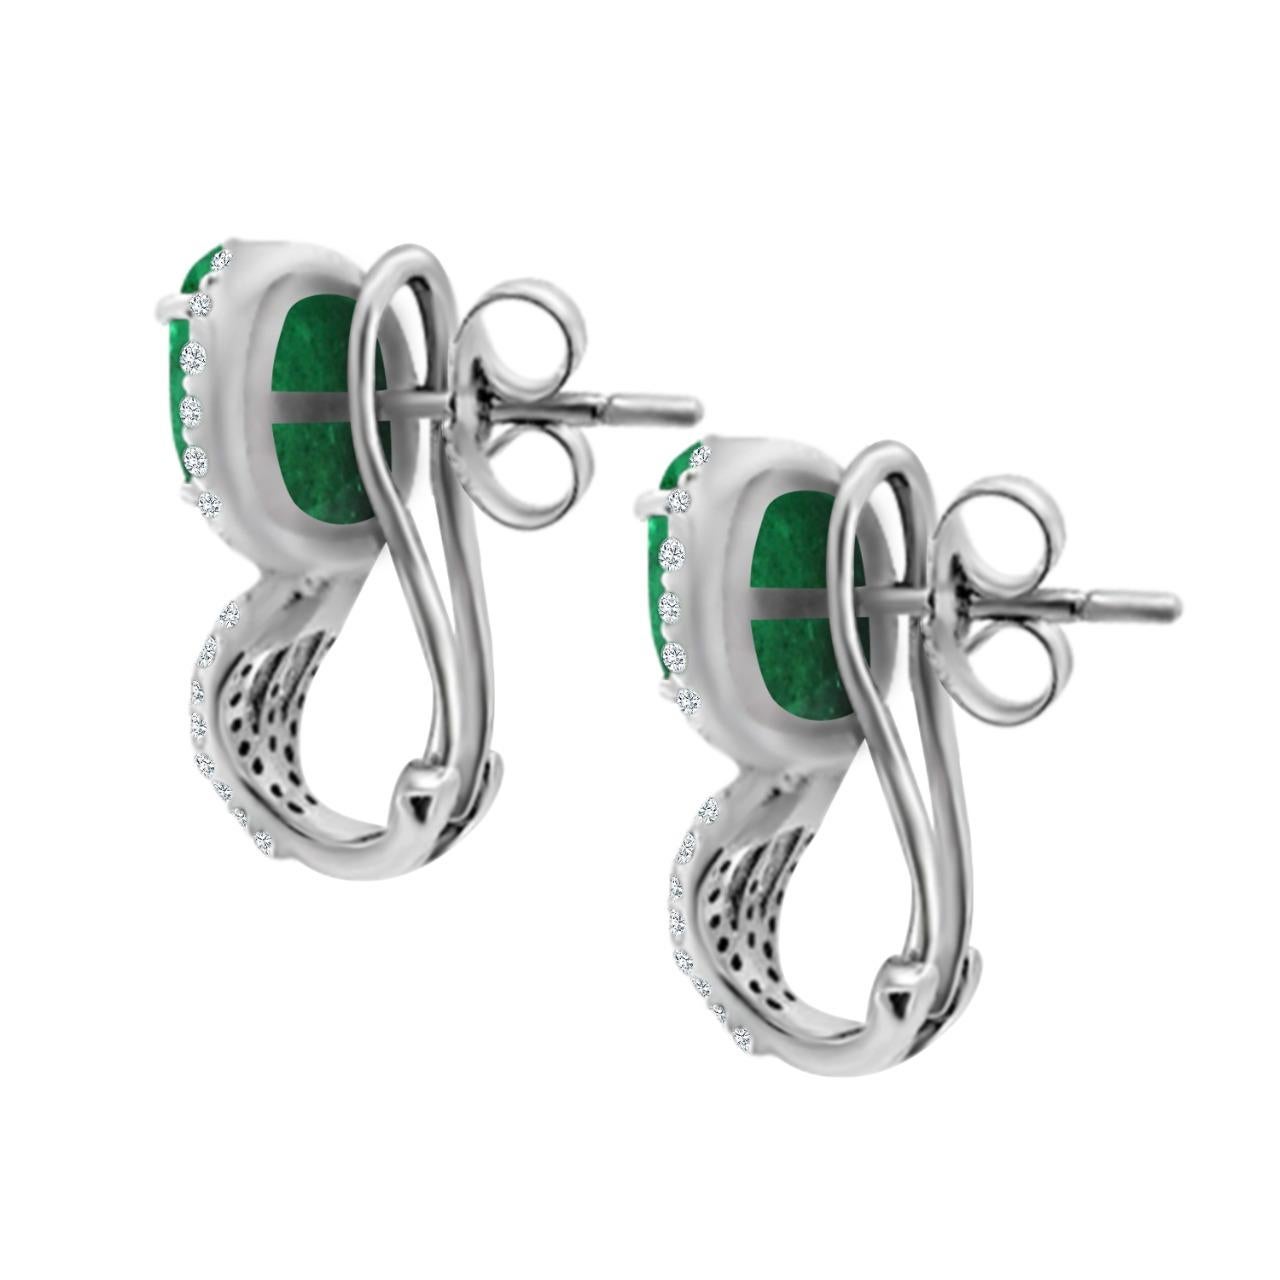 The Richly Saturated And Consistent Green Hue Of Emerald Gives It An Alluring Appearance And Unique Charm. It Is One Signature Piece Every Jewelry Collection Must Have.
This Fasinating Dangle Earring Which Has Beautiful 7X5mm Oval Shapped Emerald